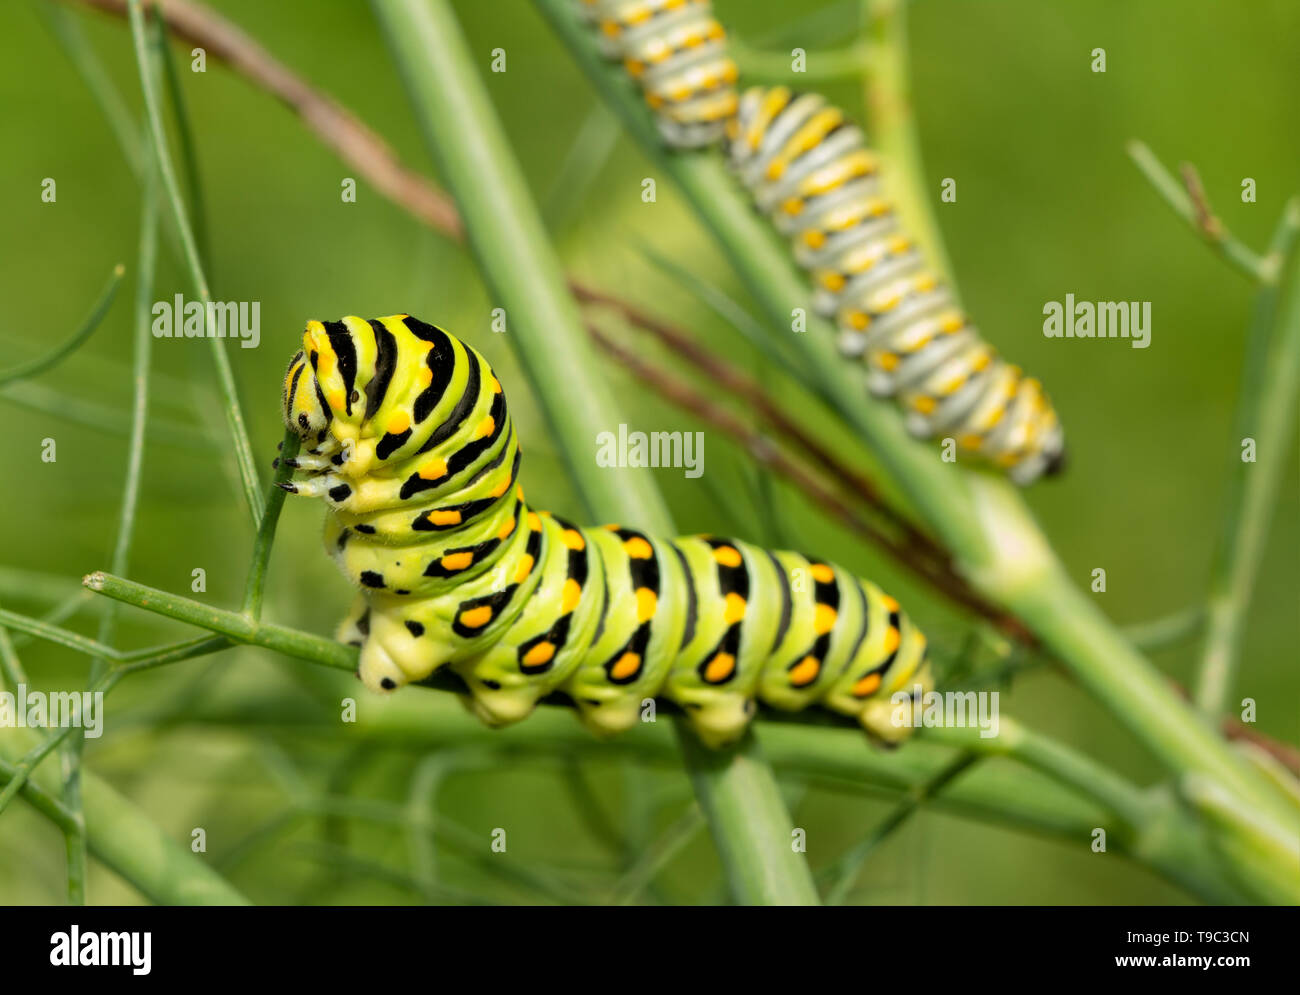 Last, fifth instar of a Black Swallowtail butterfly caterpillar eating a fennel stem, with two fourth instars in the background on the same plant Stock Photo